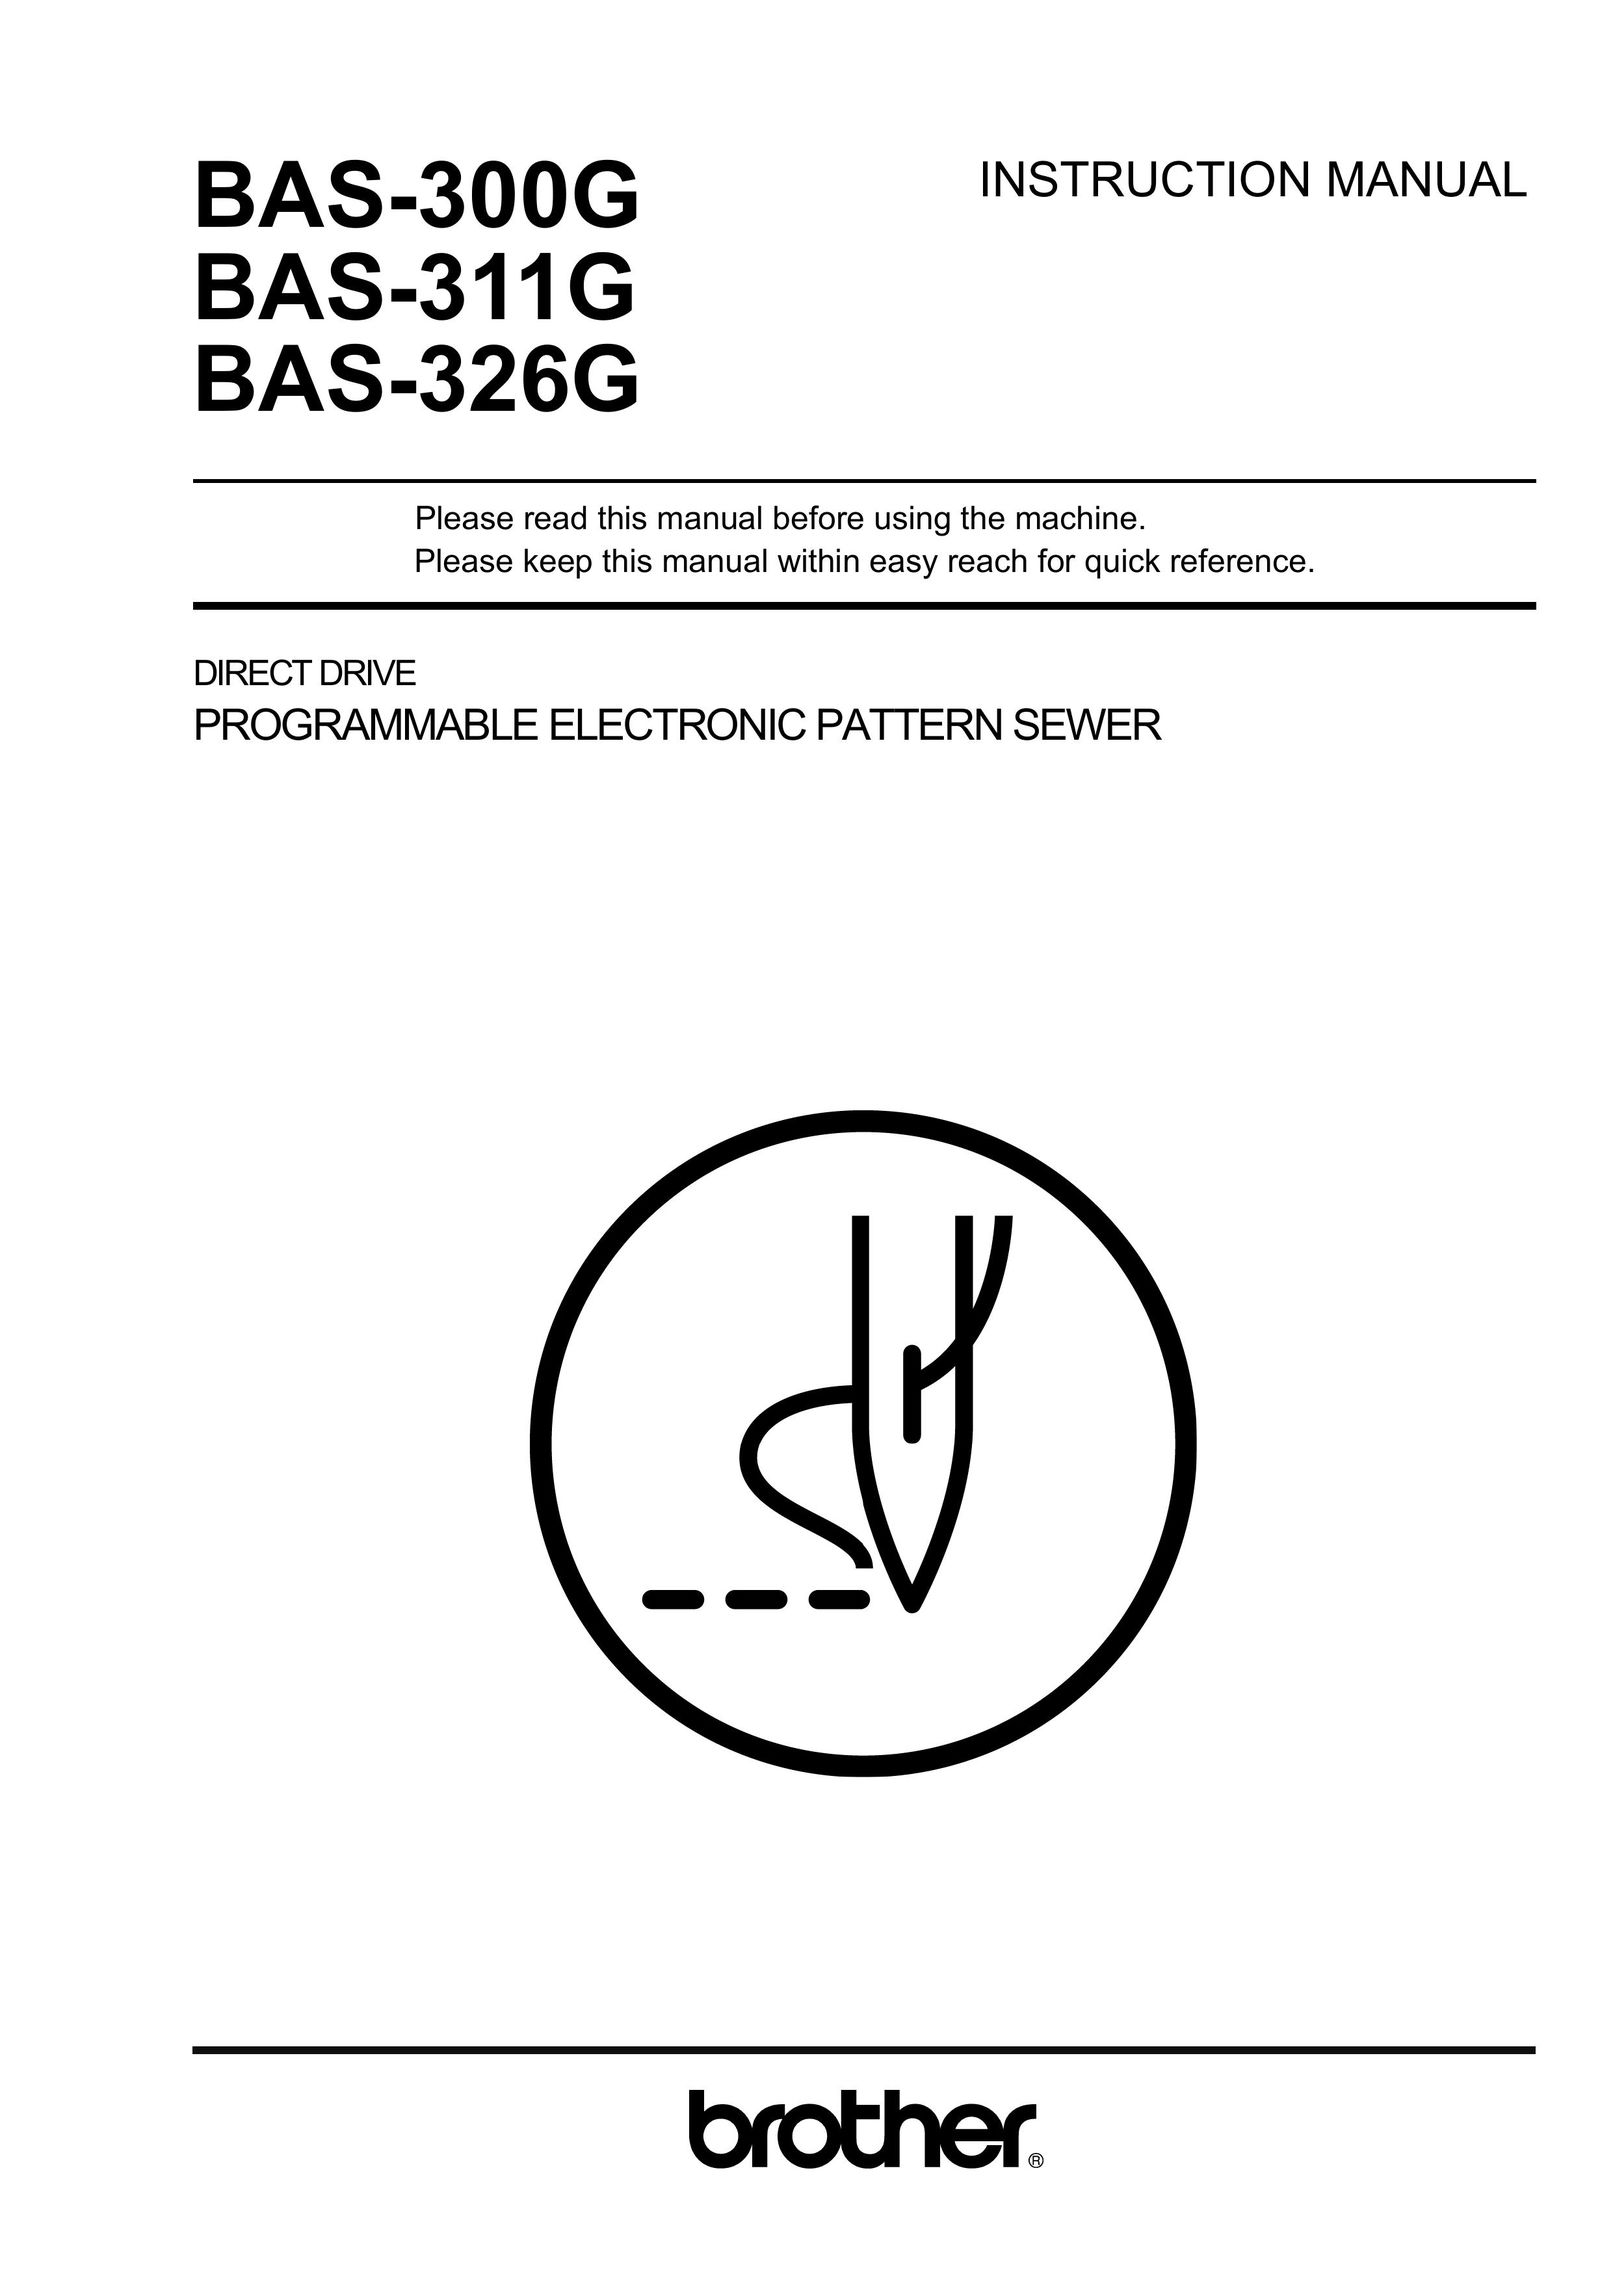 Brother BAS-300G Welding System User Manual